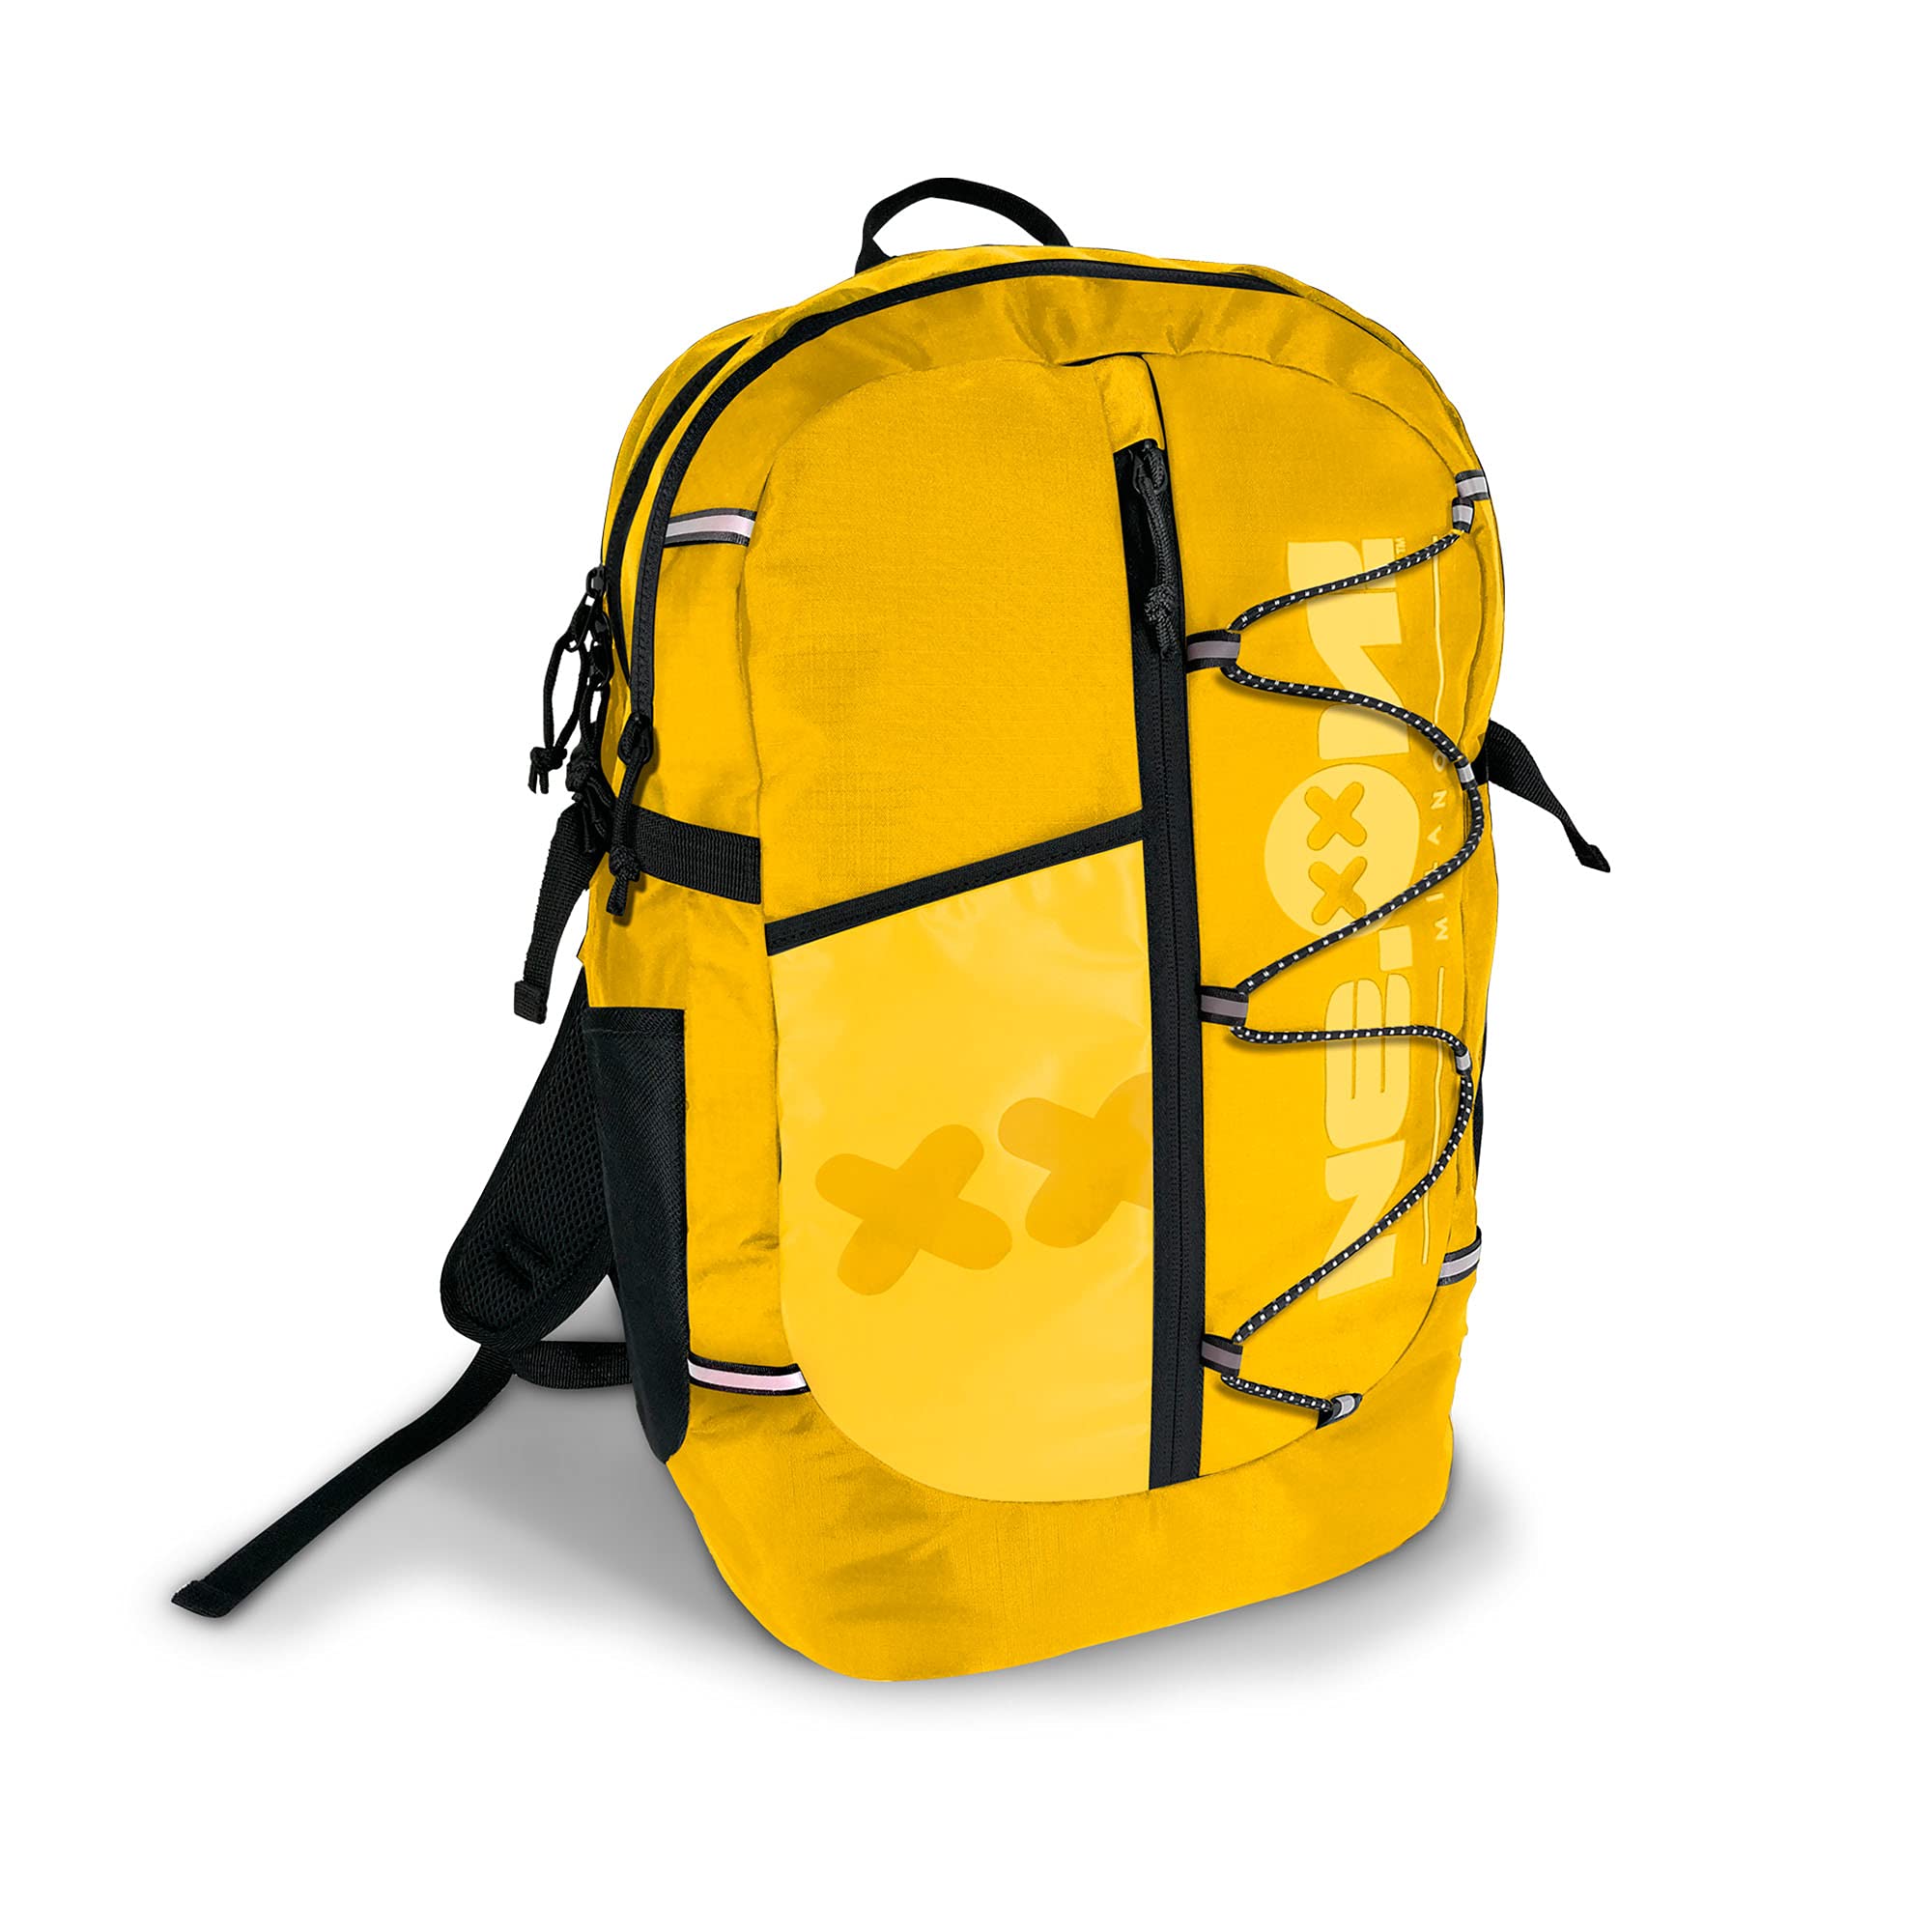 NEW CARRY BACKPACK YELLOW